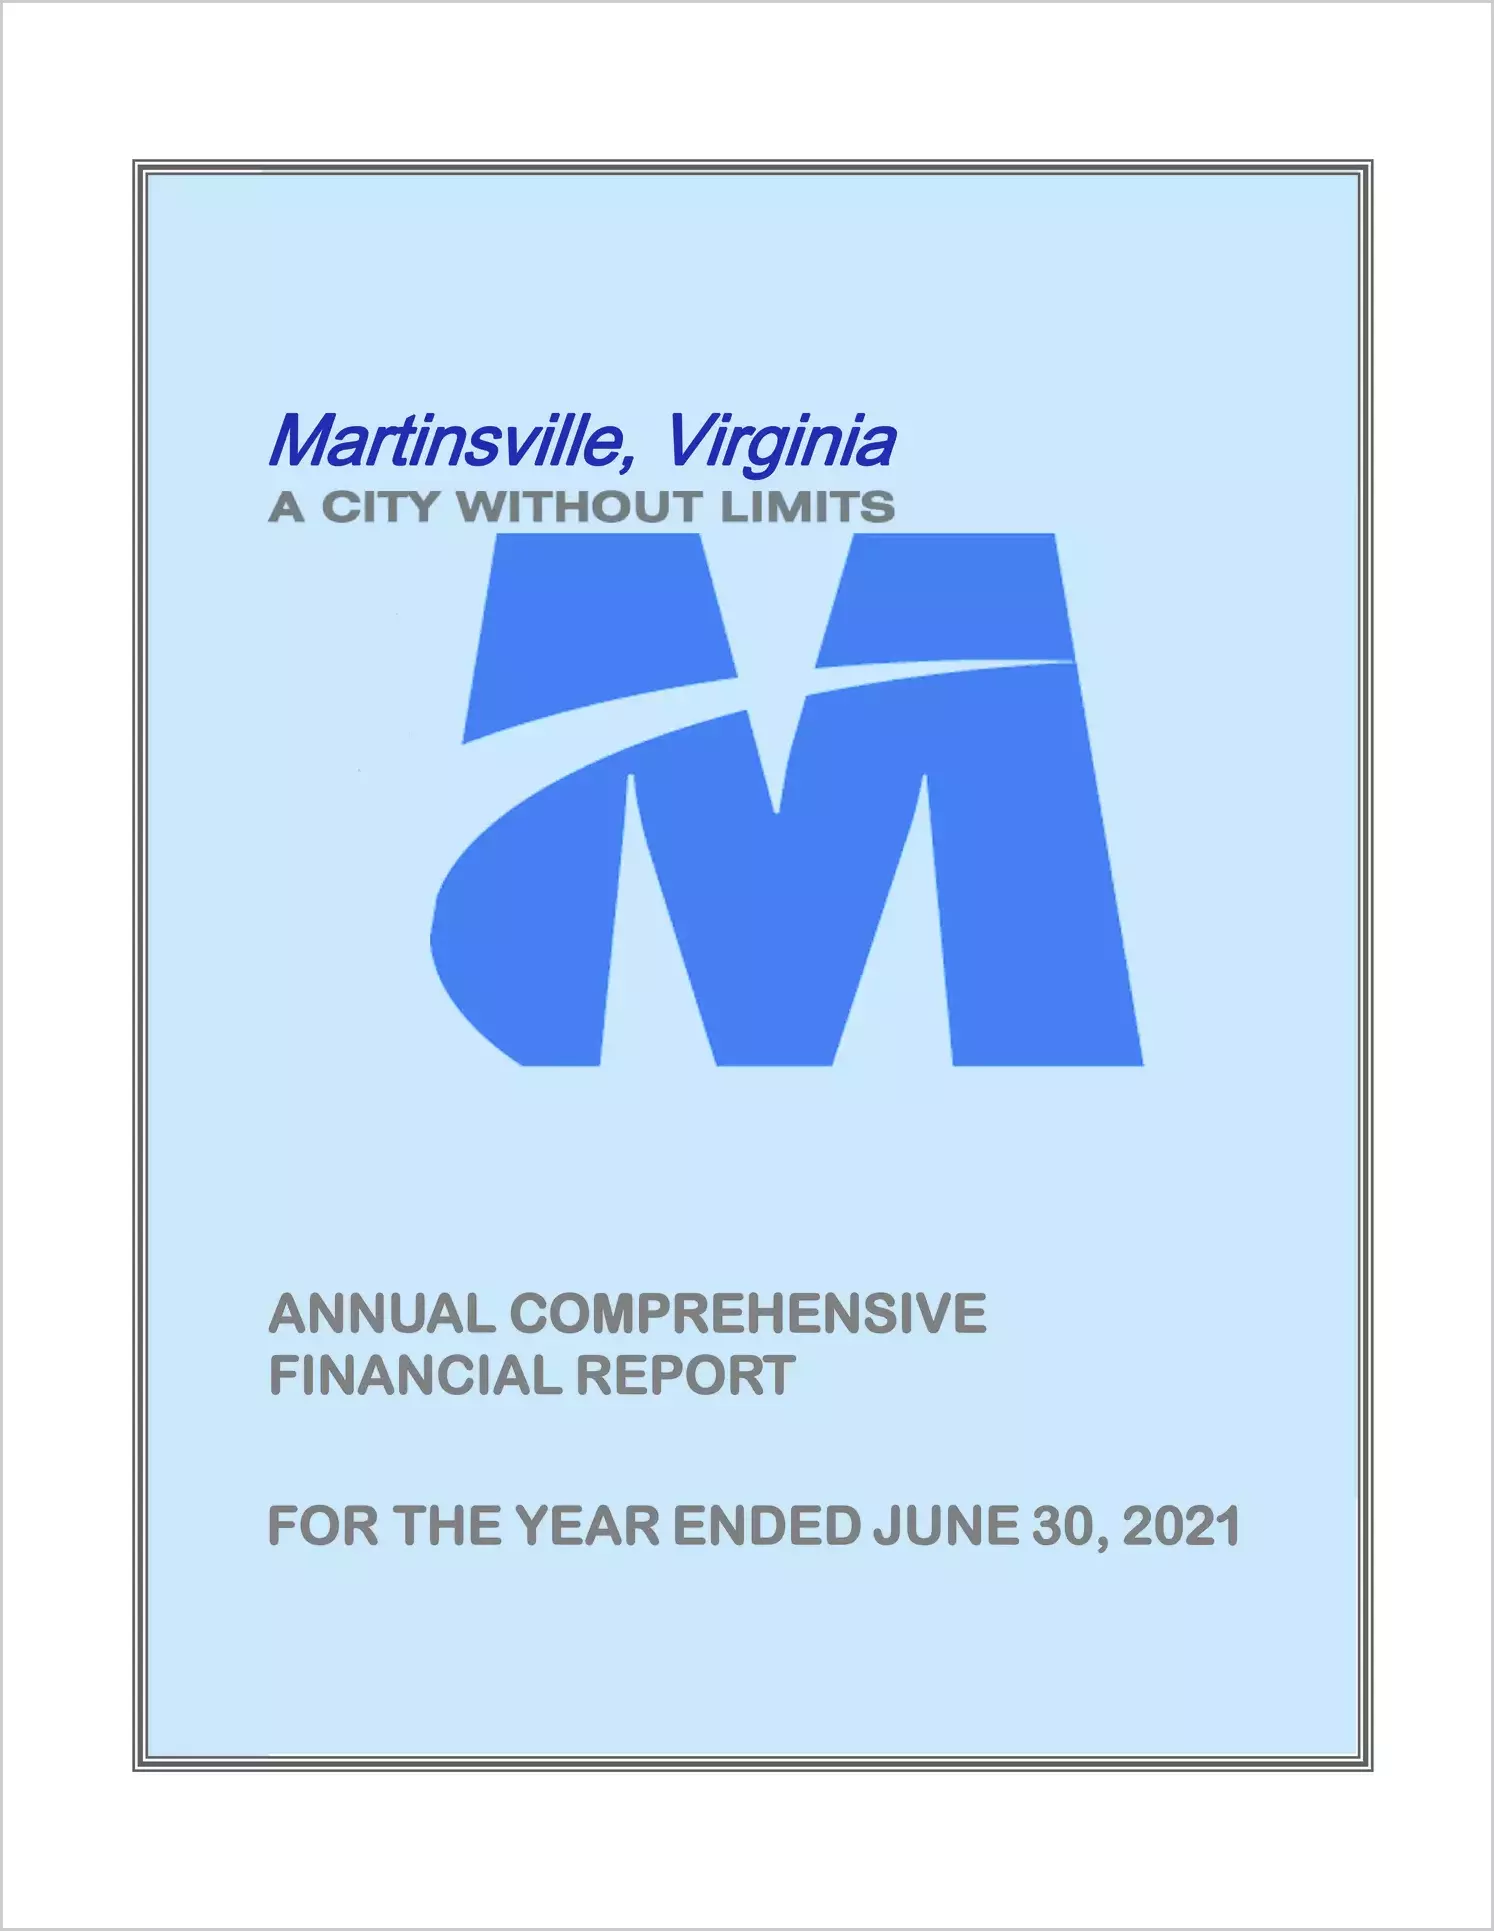 2021 Annual Financial Report for City of Martinsville